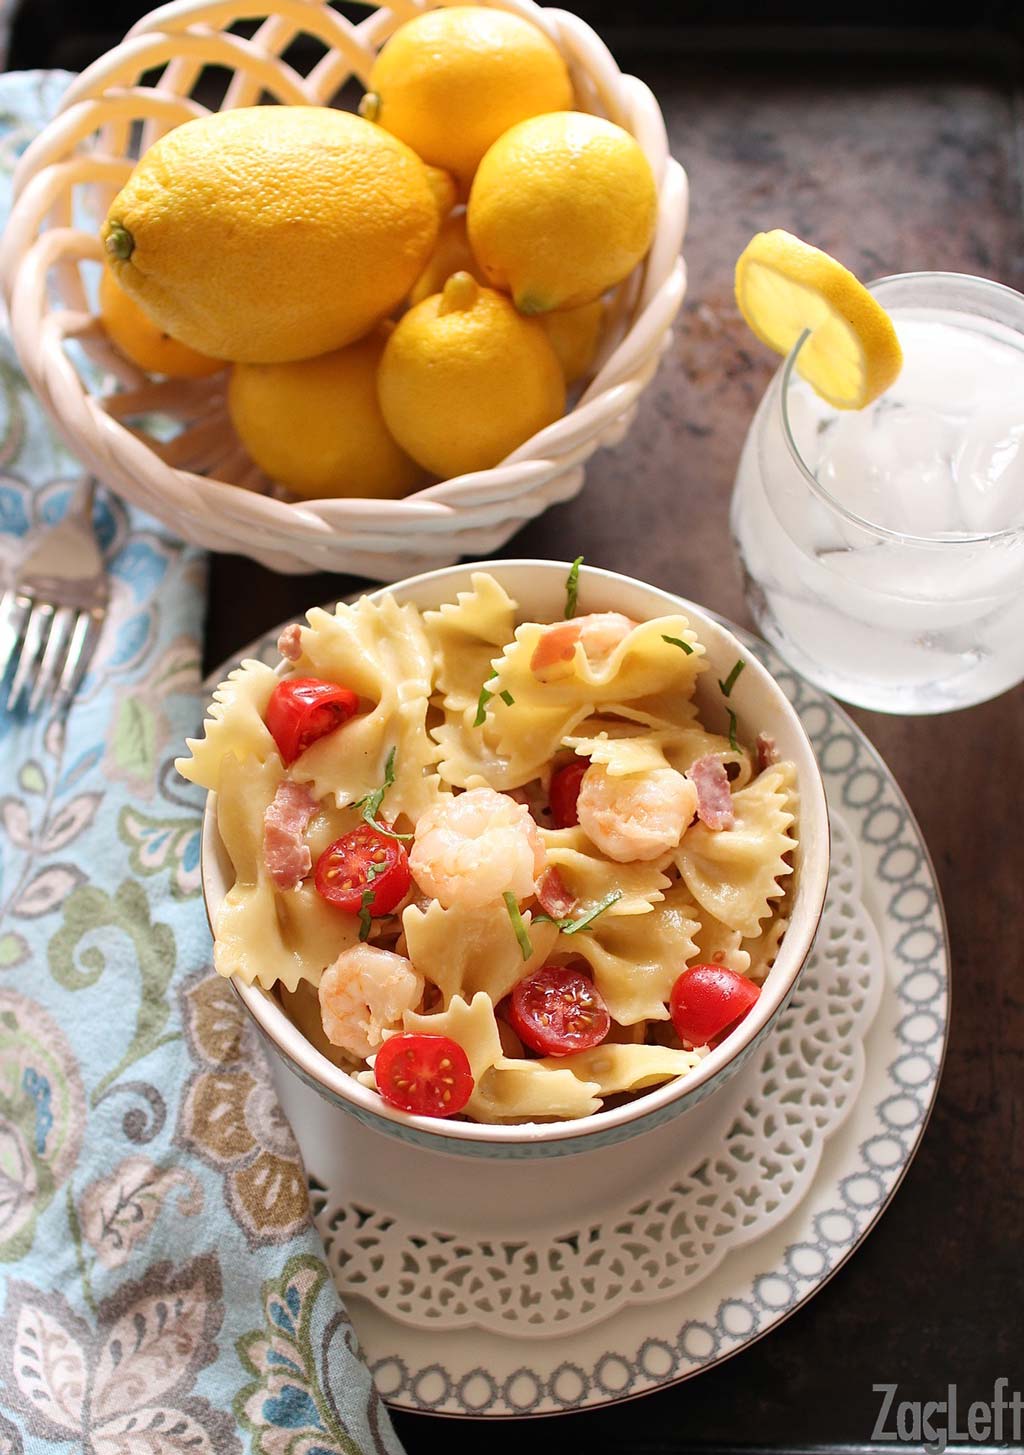 An overhead view of shrimp and prosciutto pasta in a small bowl plated on a metal tray with a small bowl of lemons and a glass of ice water.